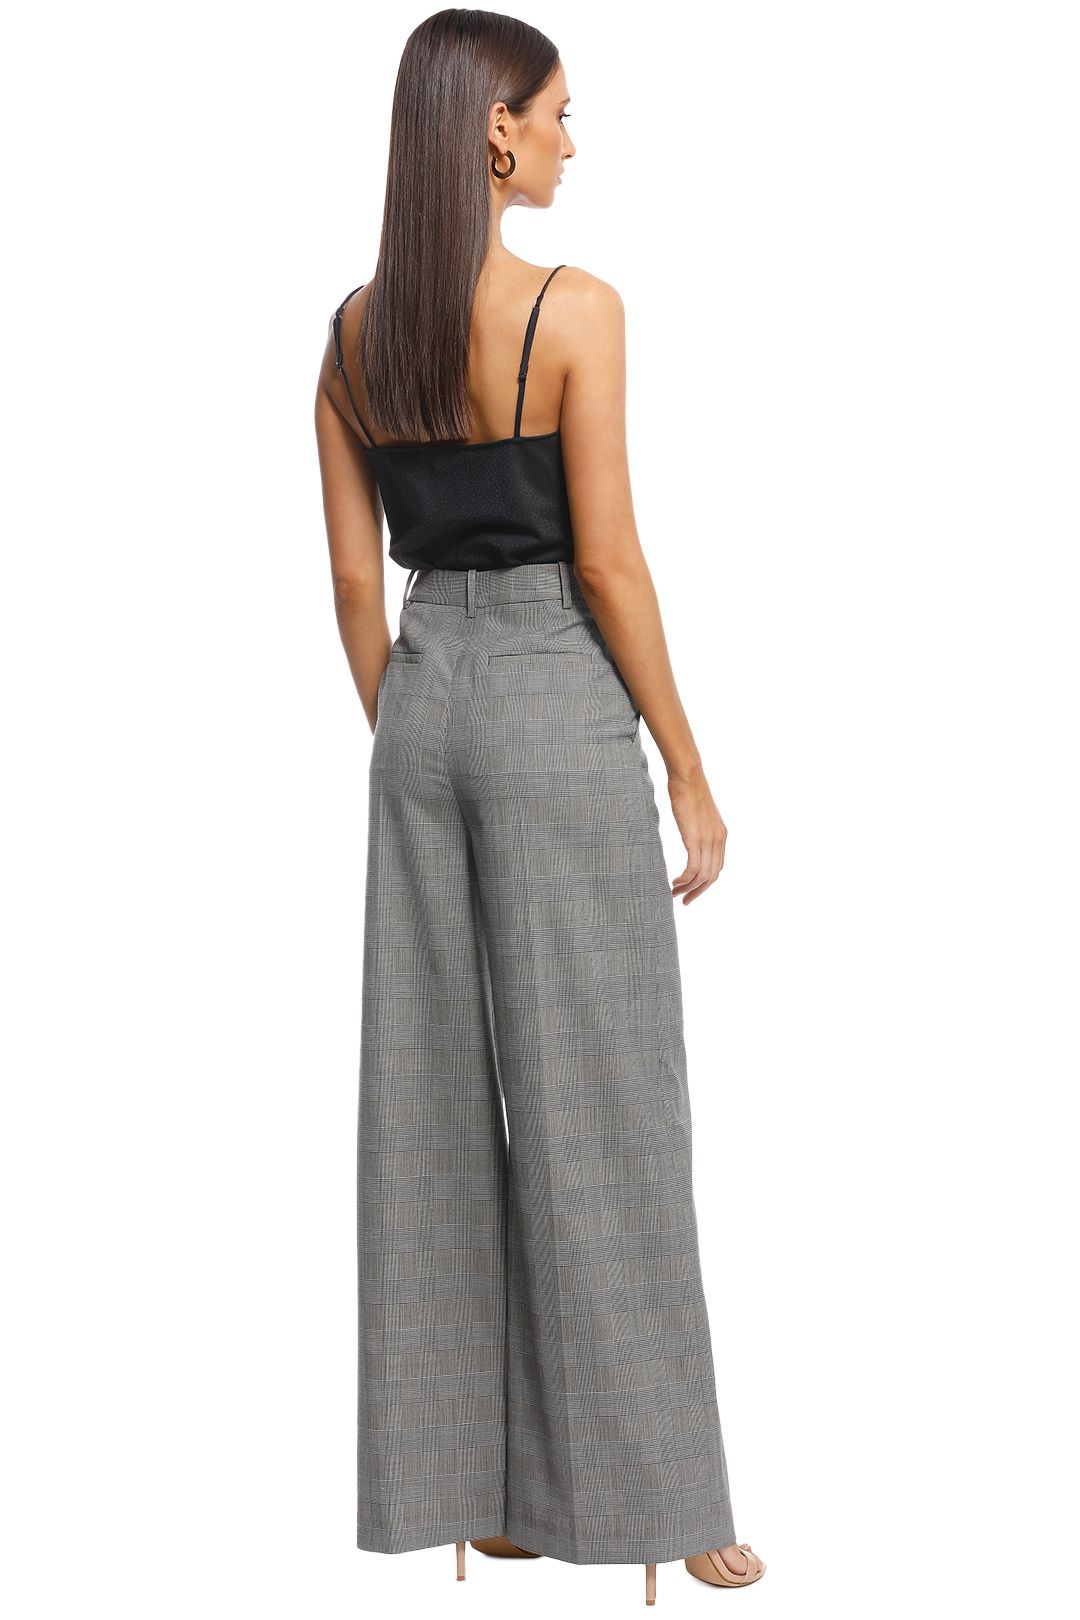 Camilla and Marc - Ackley Trouser - Grey - Back